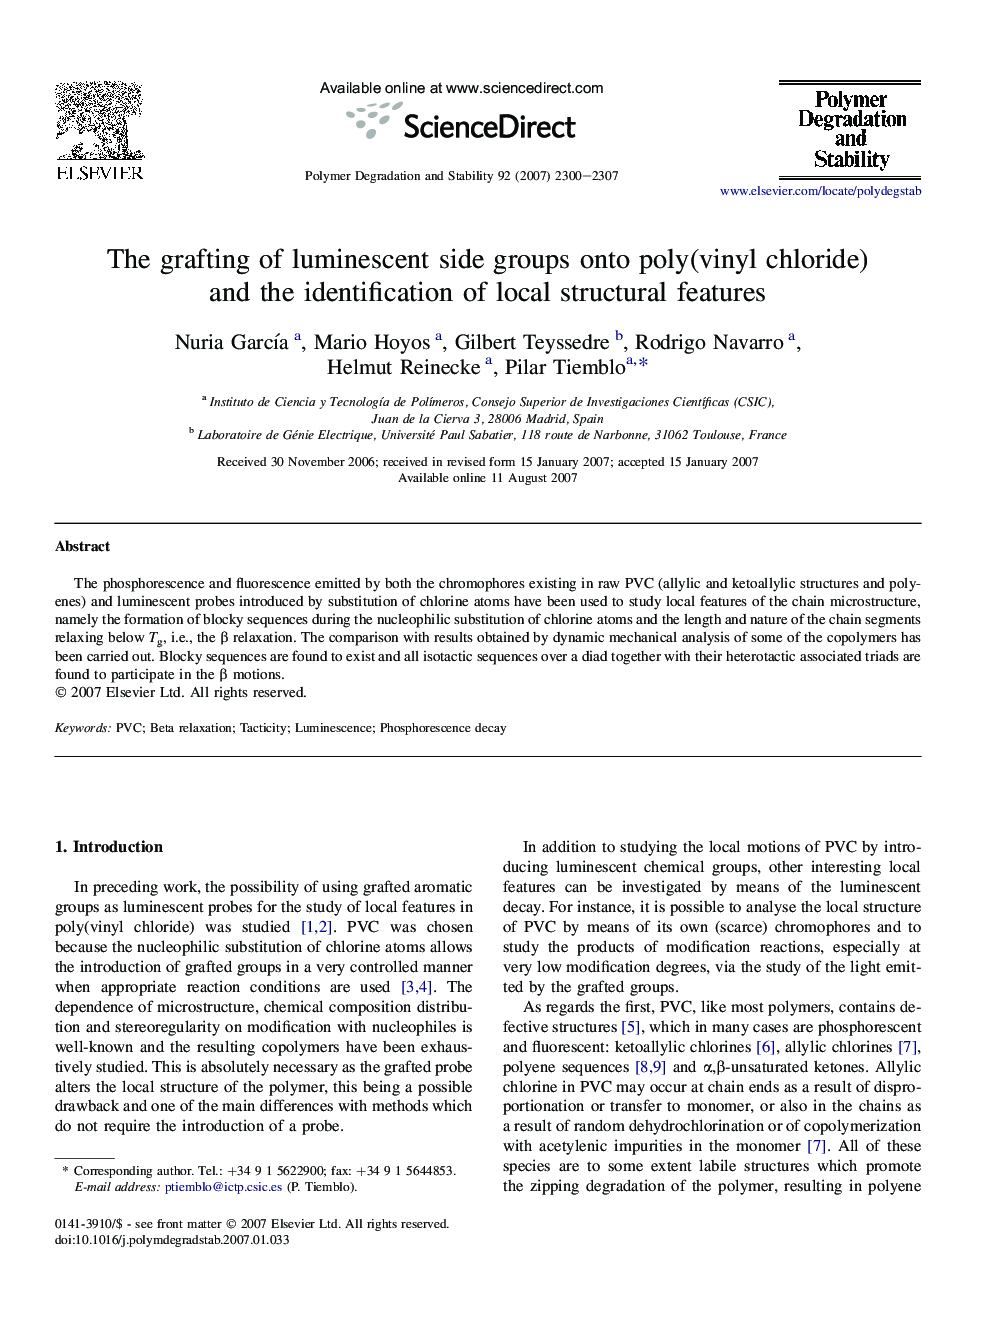 The grafting of luminescent side groups onto poly(vinyl chloride) and the identification of local structural features